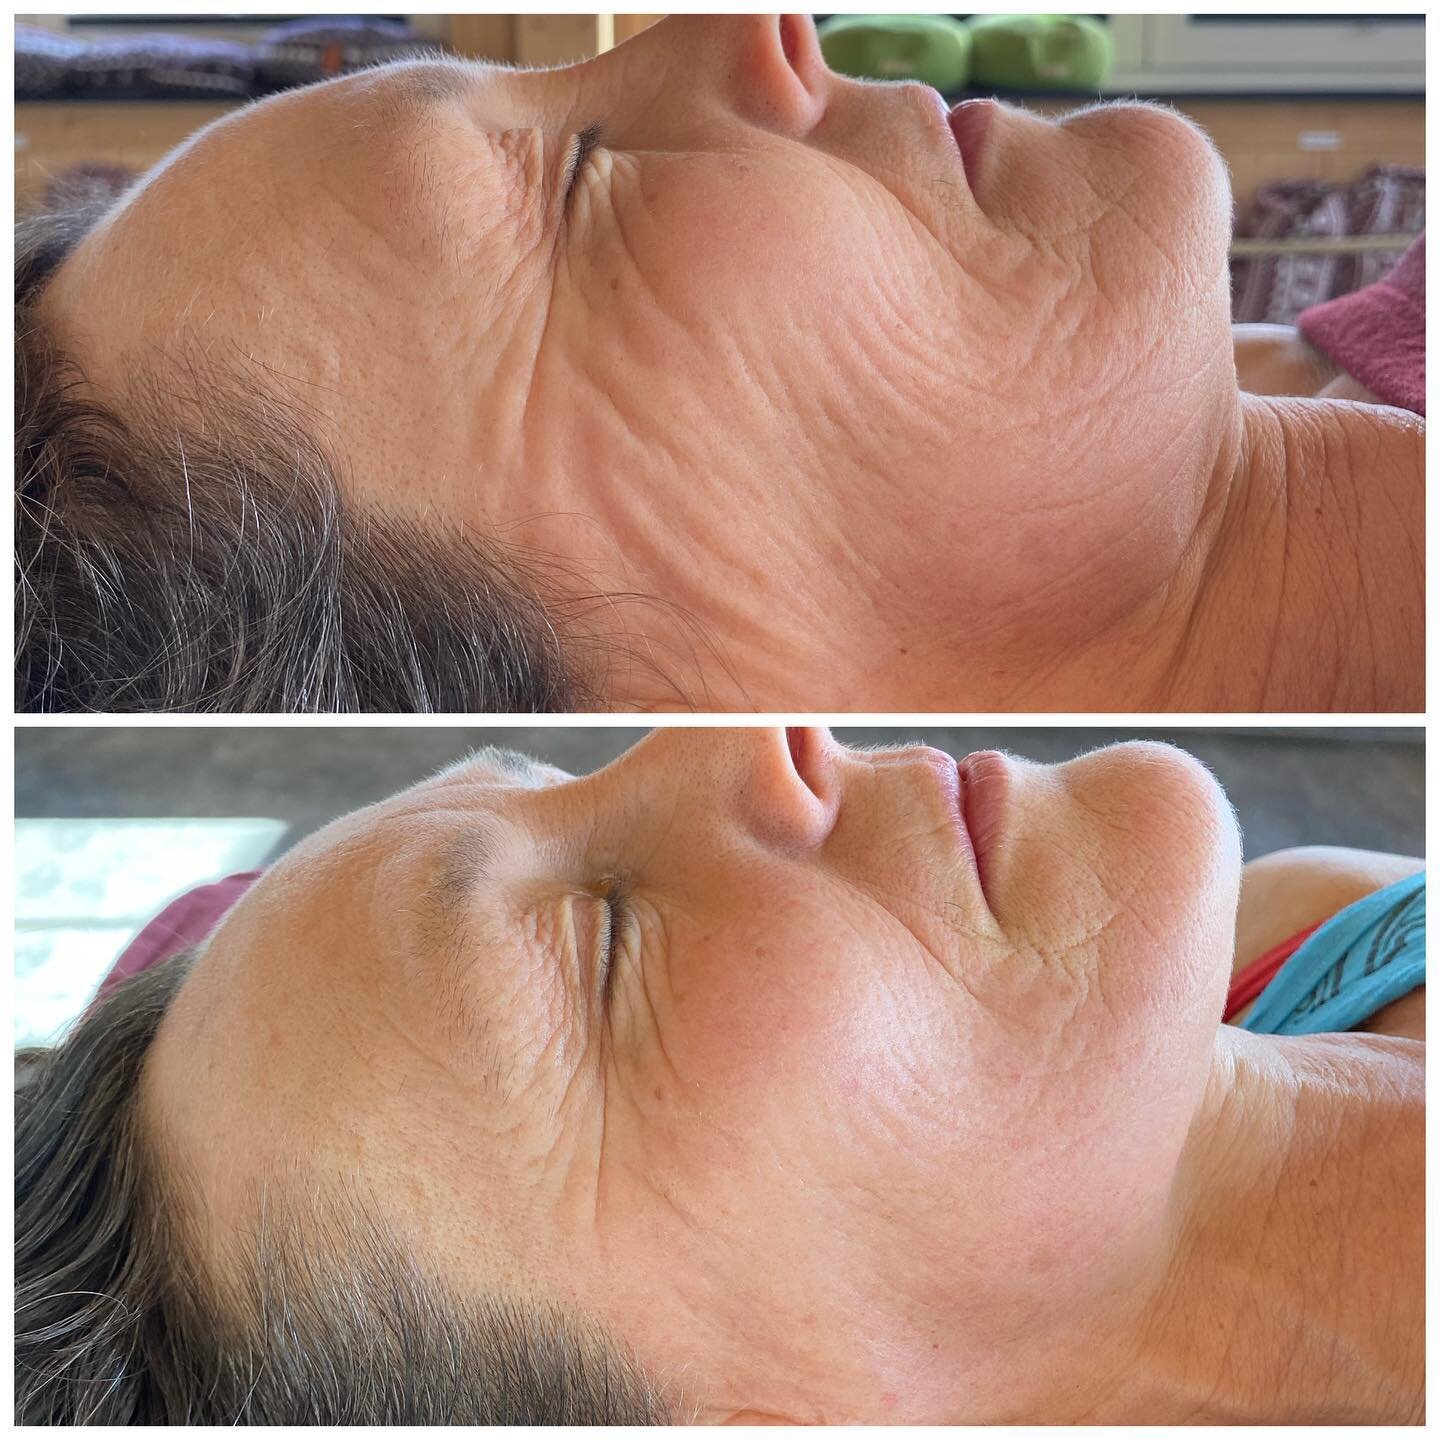 Another amazing result after #facialsculpting This client was over the moon happy with her results. Go to Bio in link to schedule your appointment.